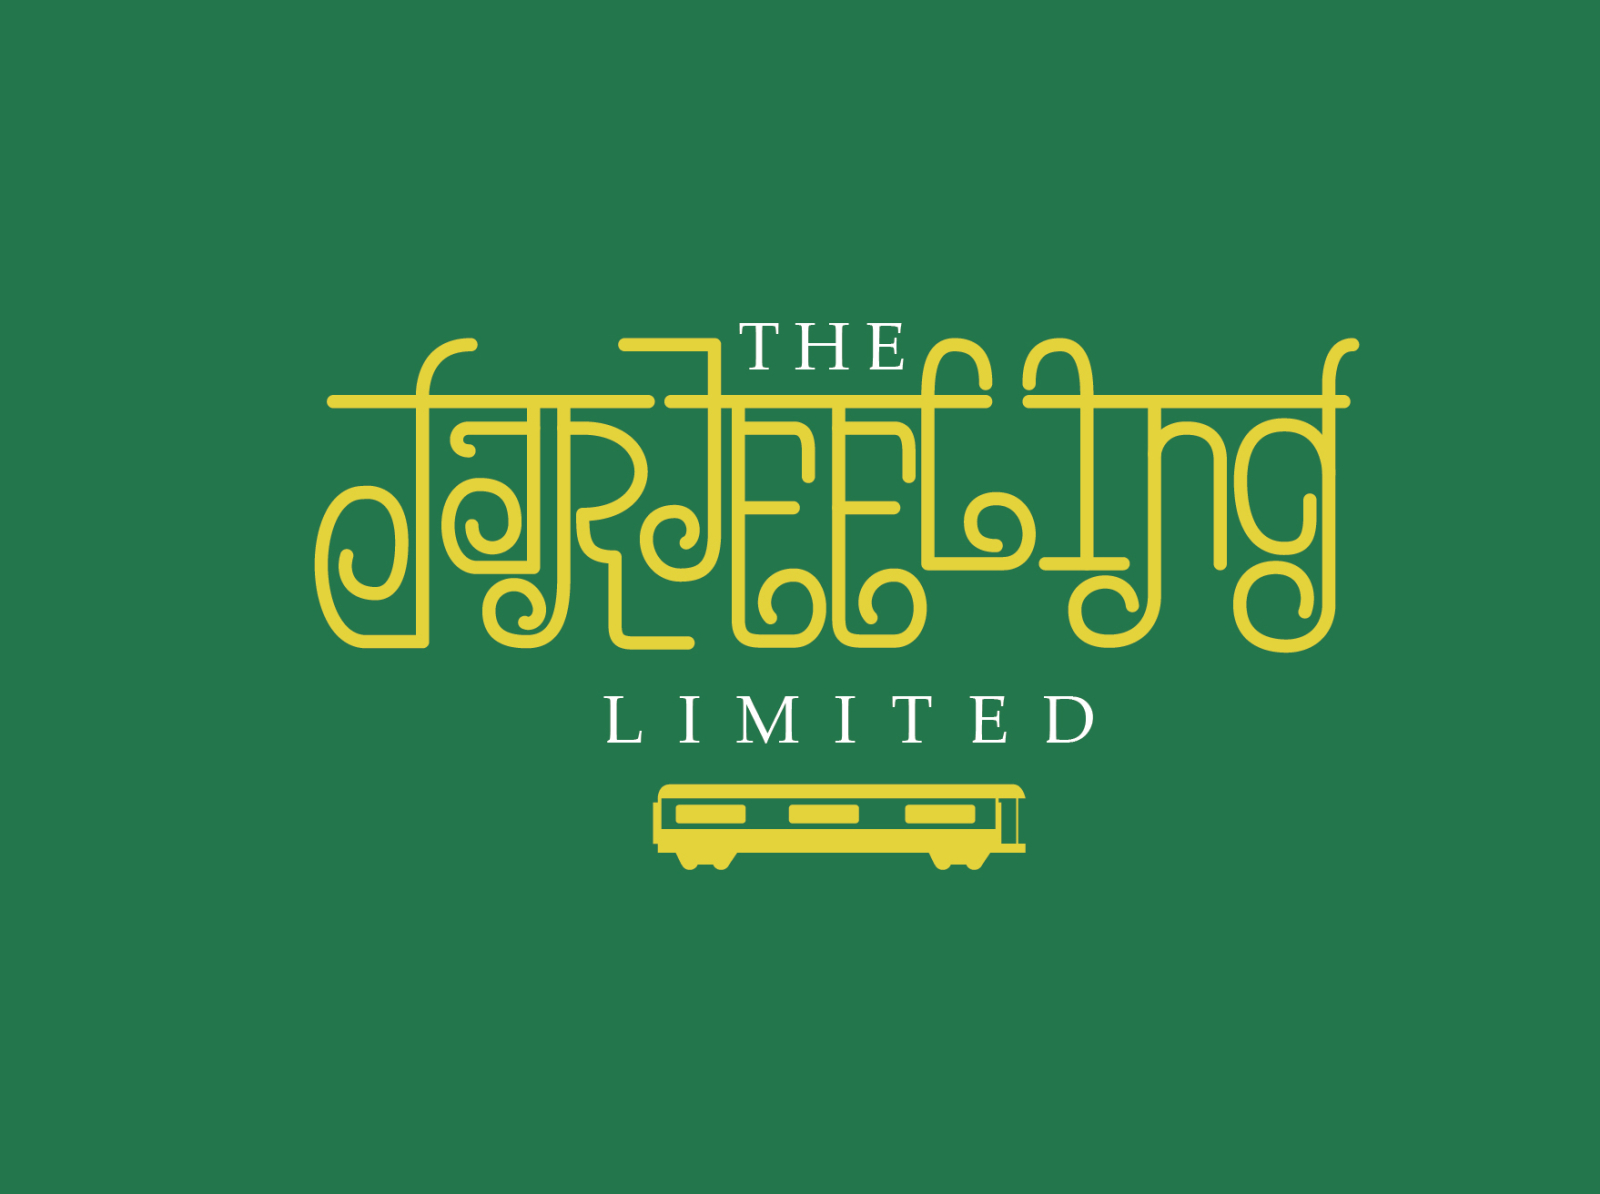 The Darjeeling Limited by Wes Anderson on Behance